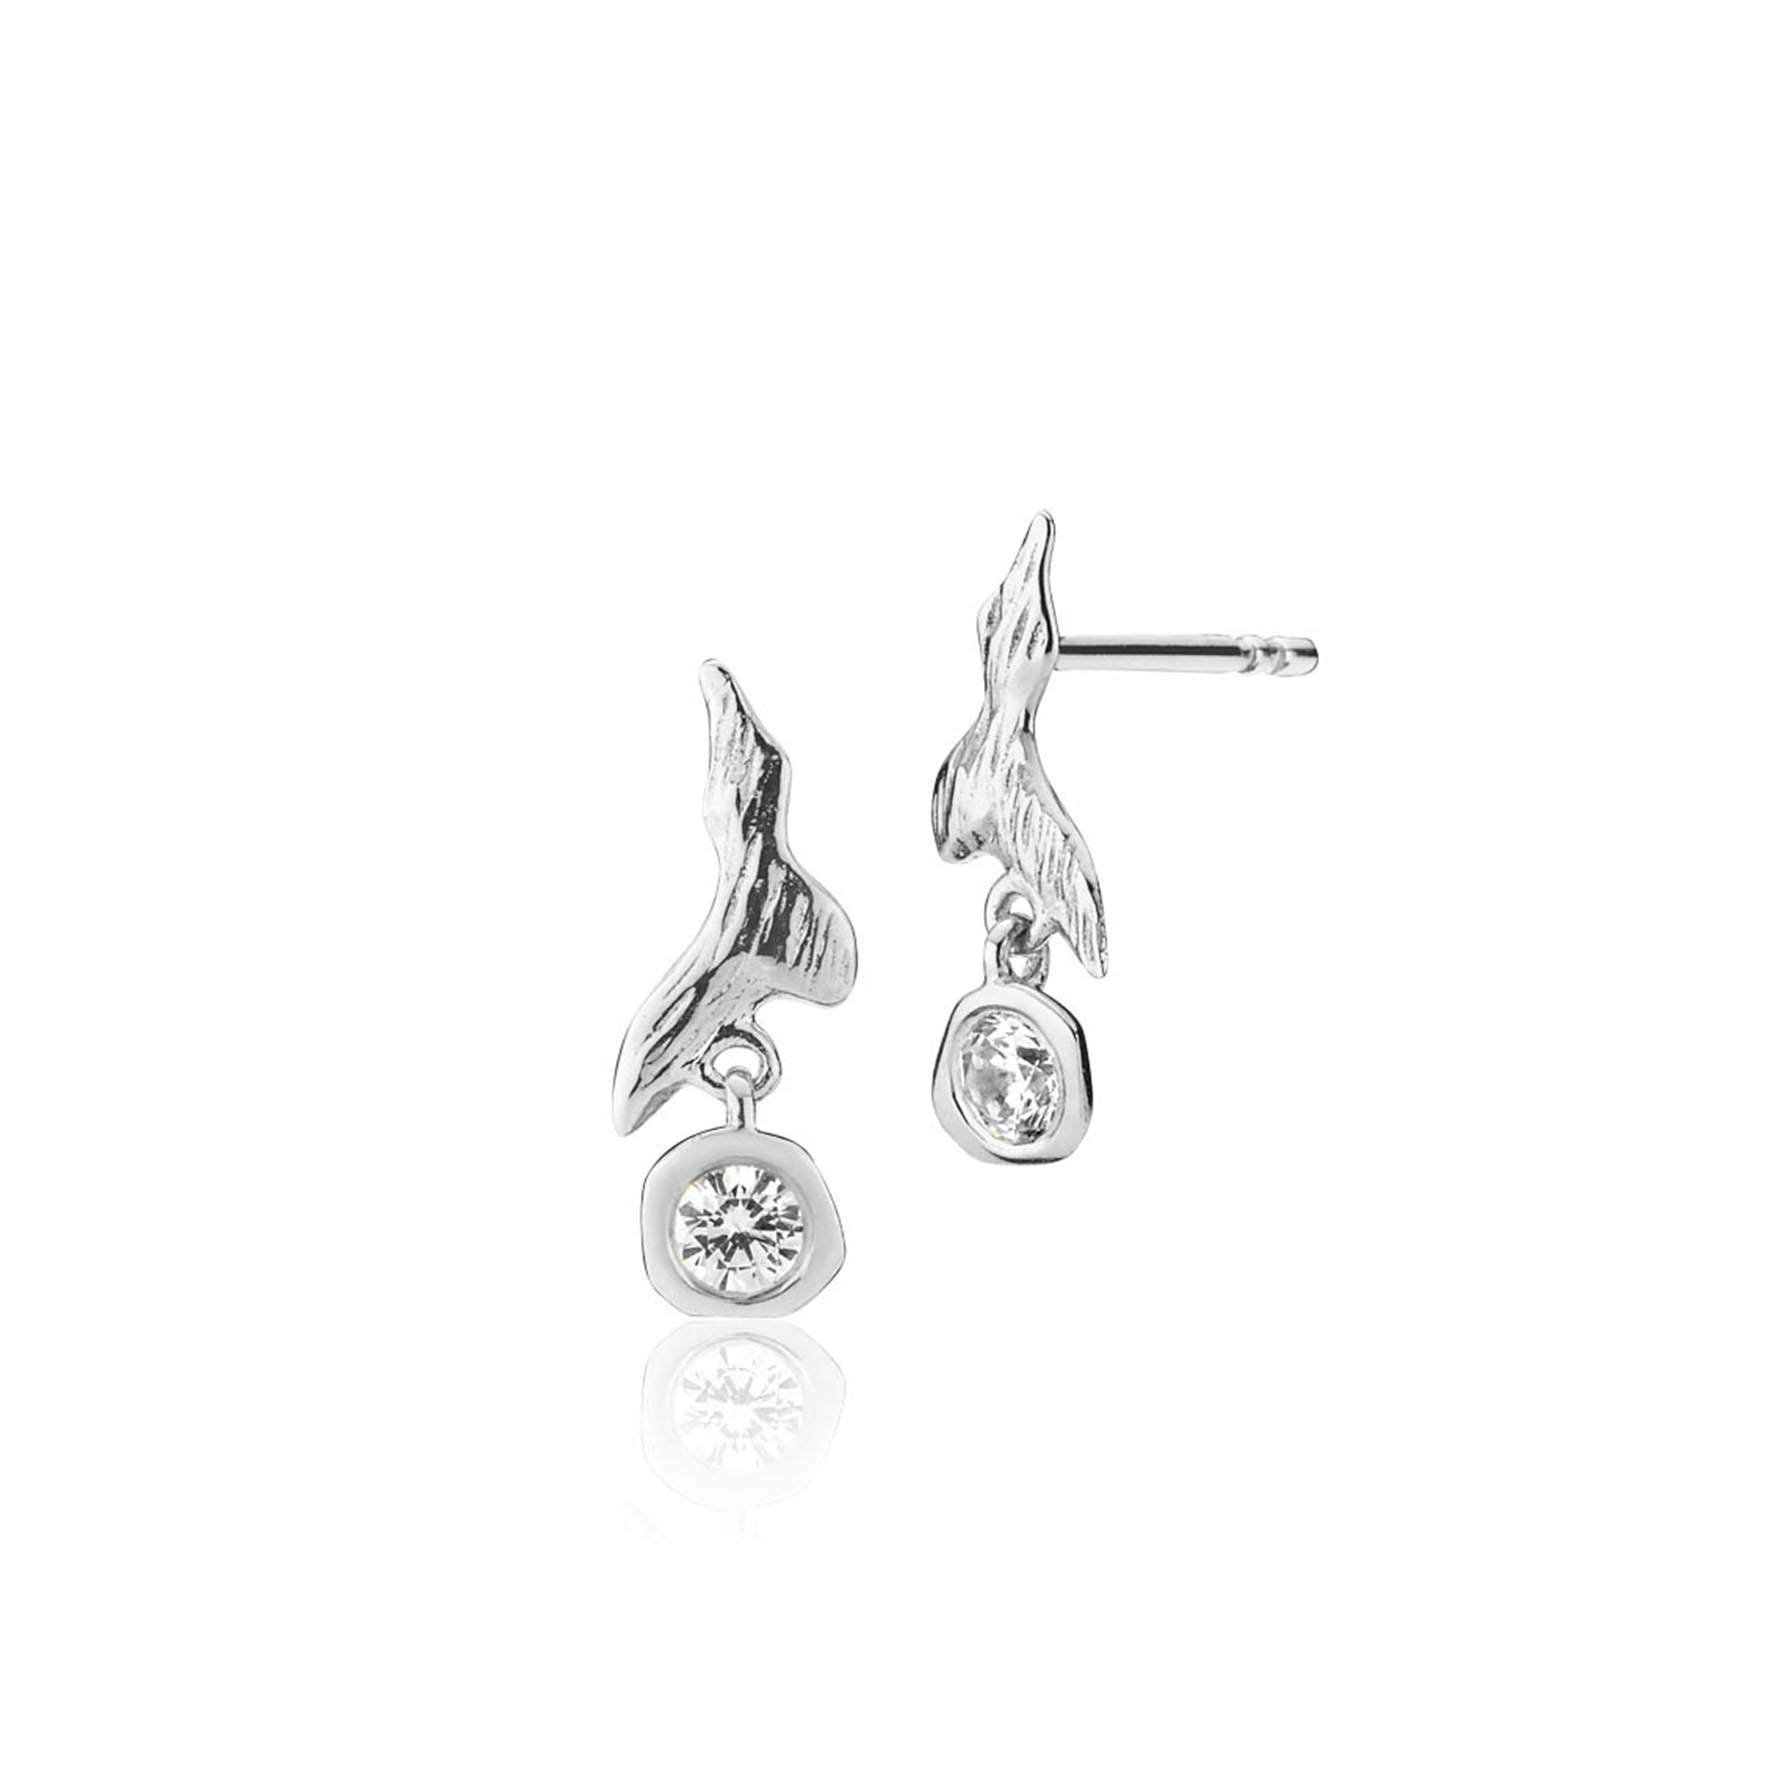 Fairy Earrings With Stone från Izabel Camille i Silver Sterling 925|